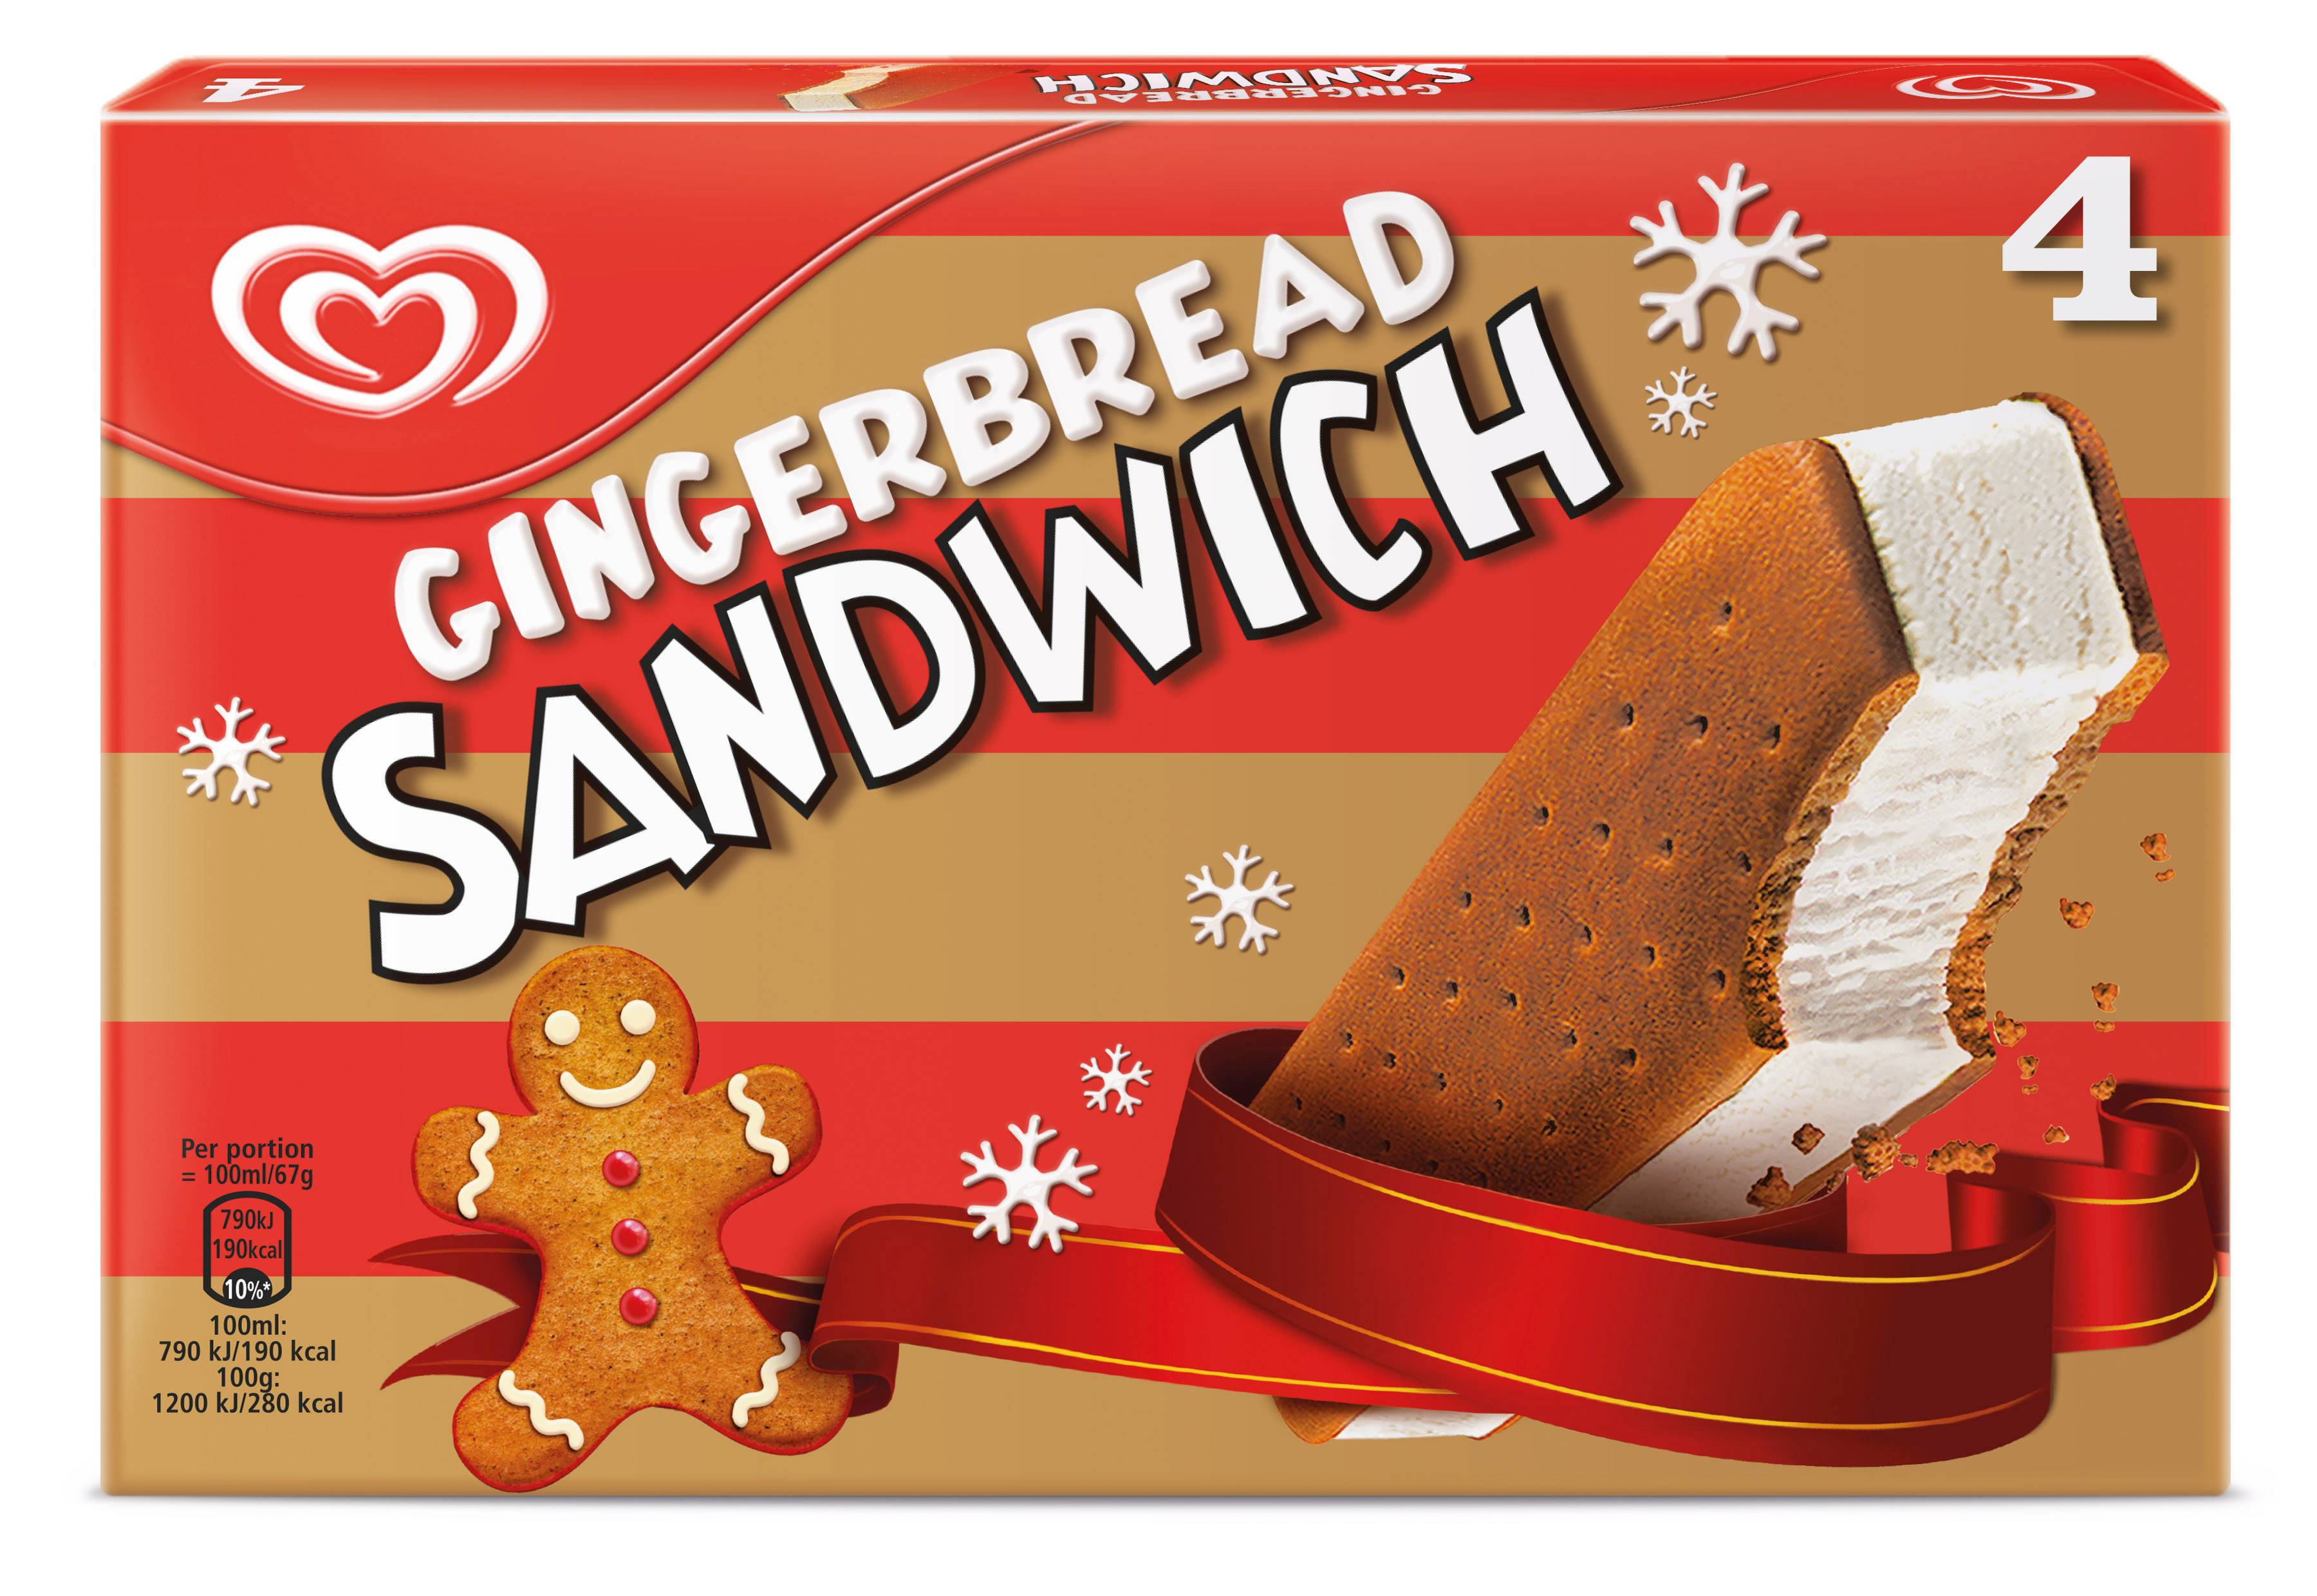 Wall's unveils new Gingerbread Sandwich winter ice cream